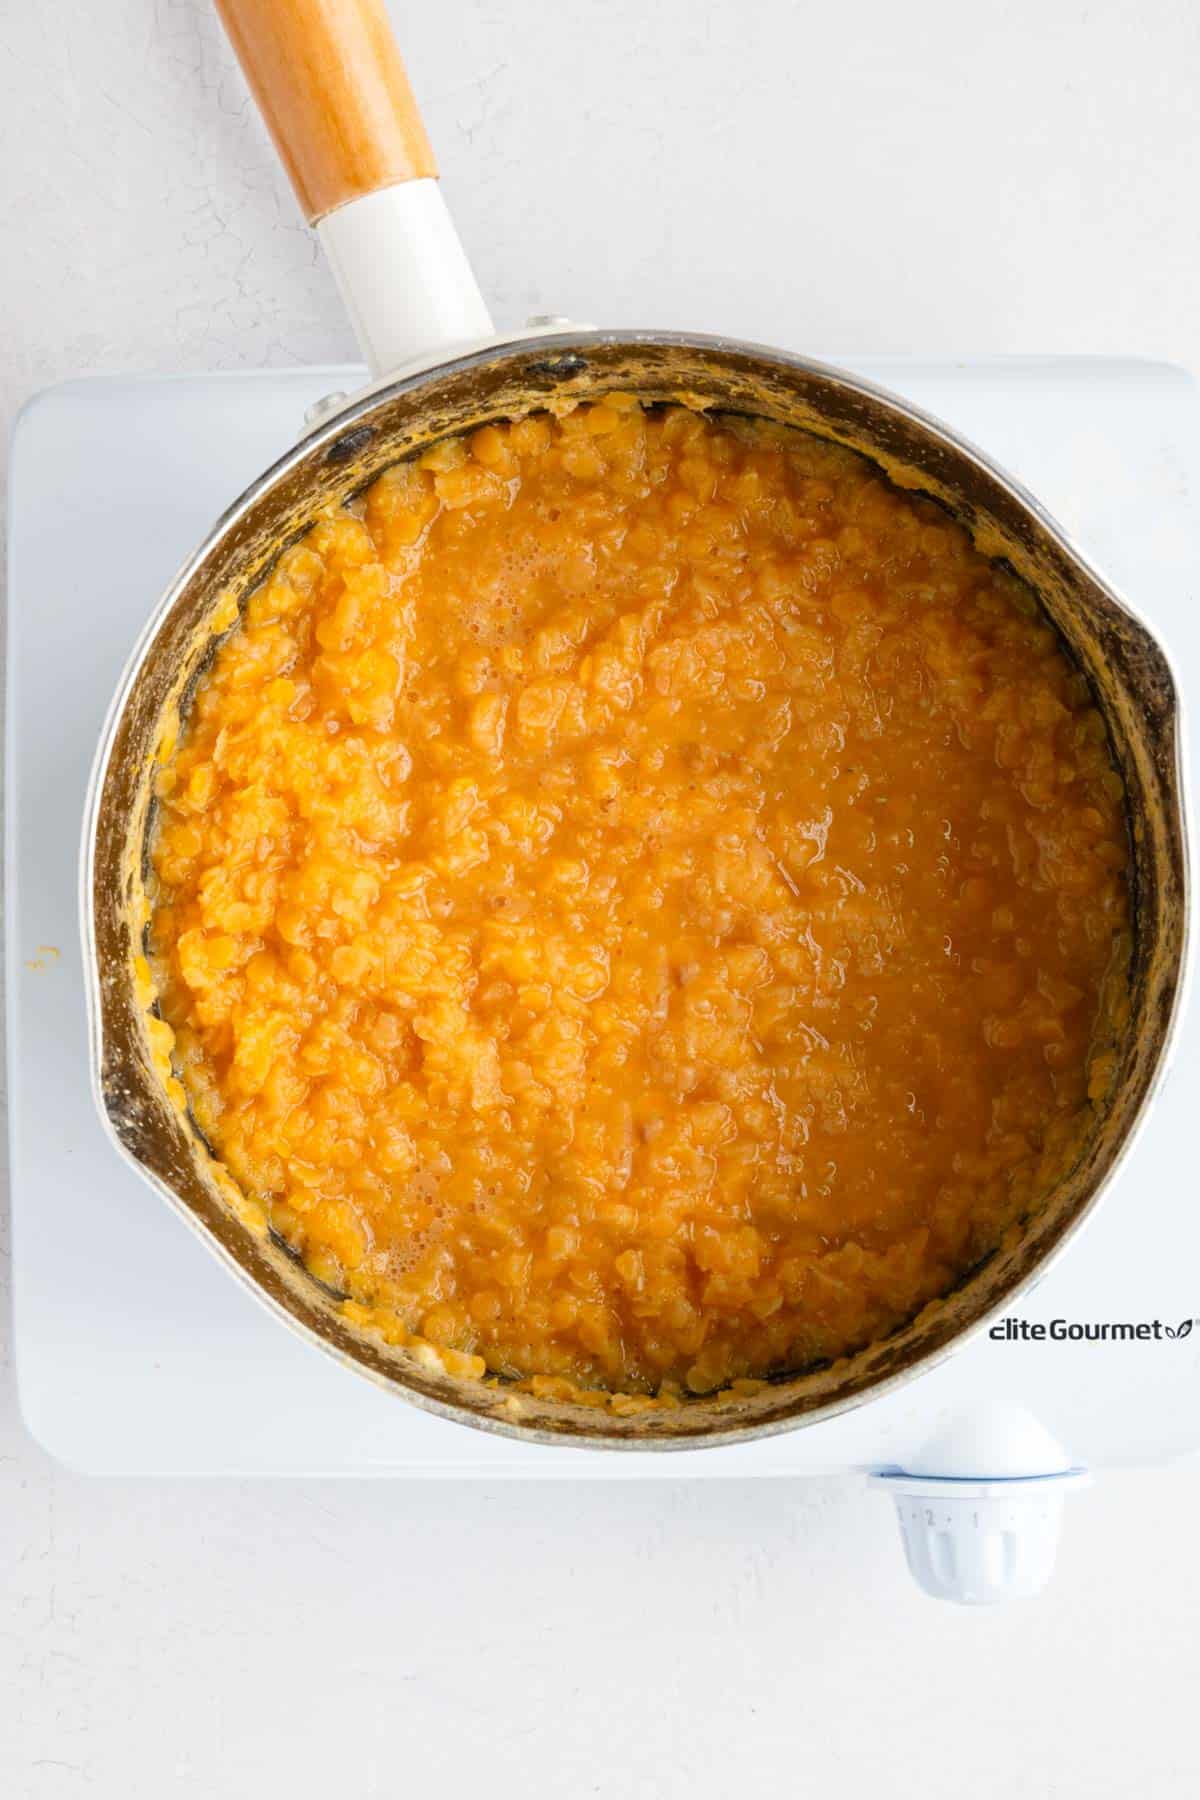 Red lentils cooking in a white saucepan.